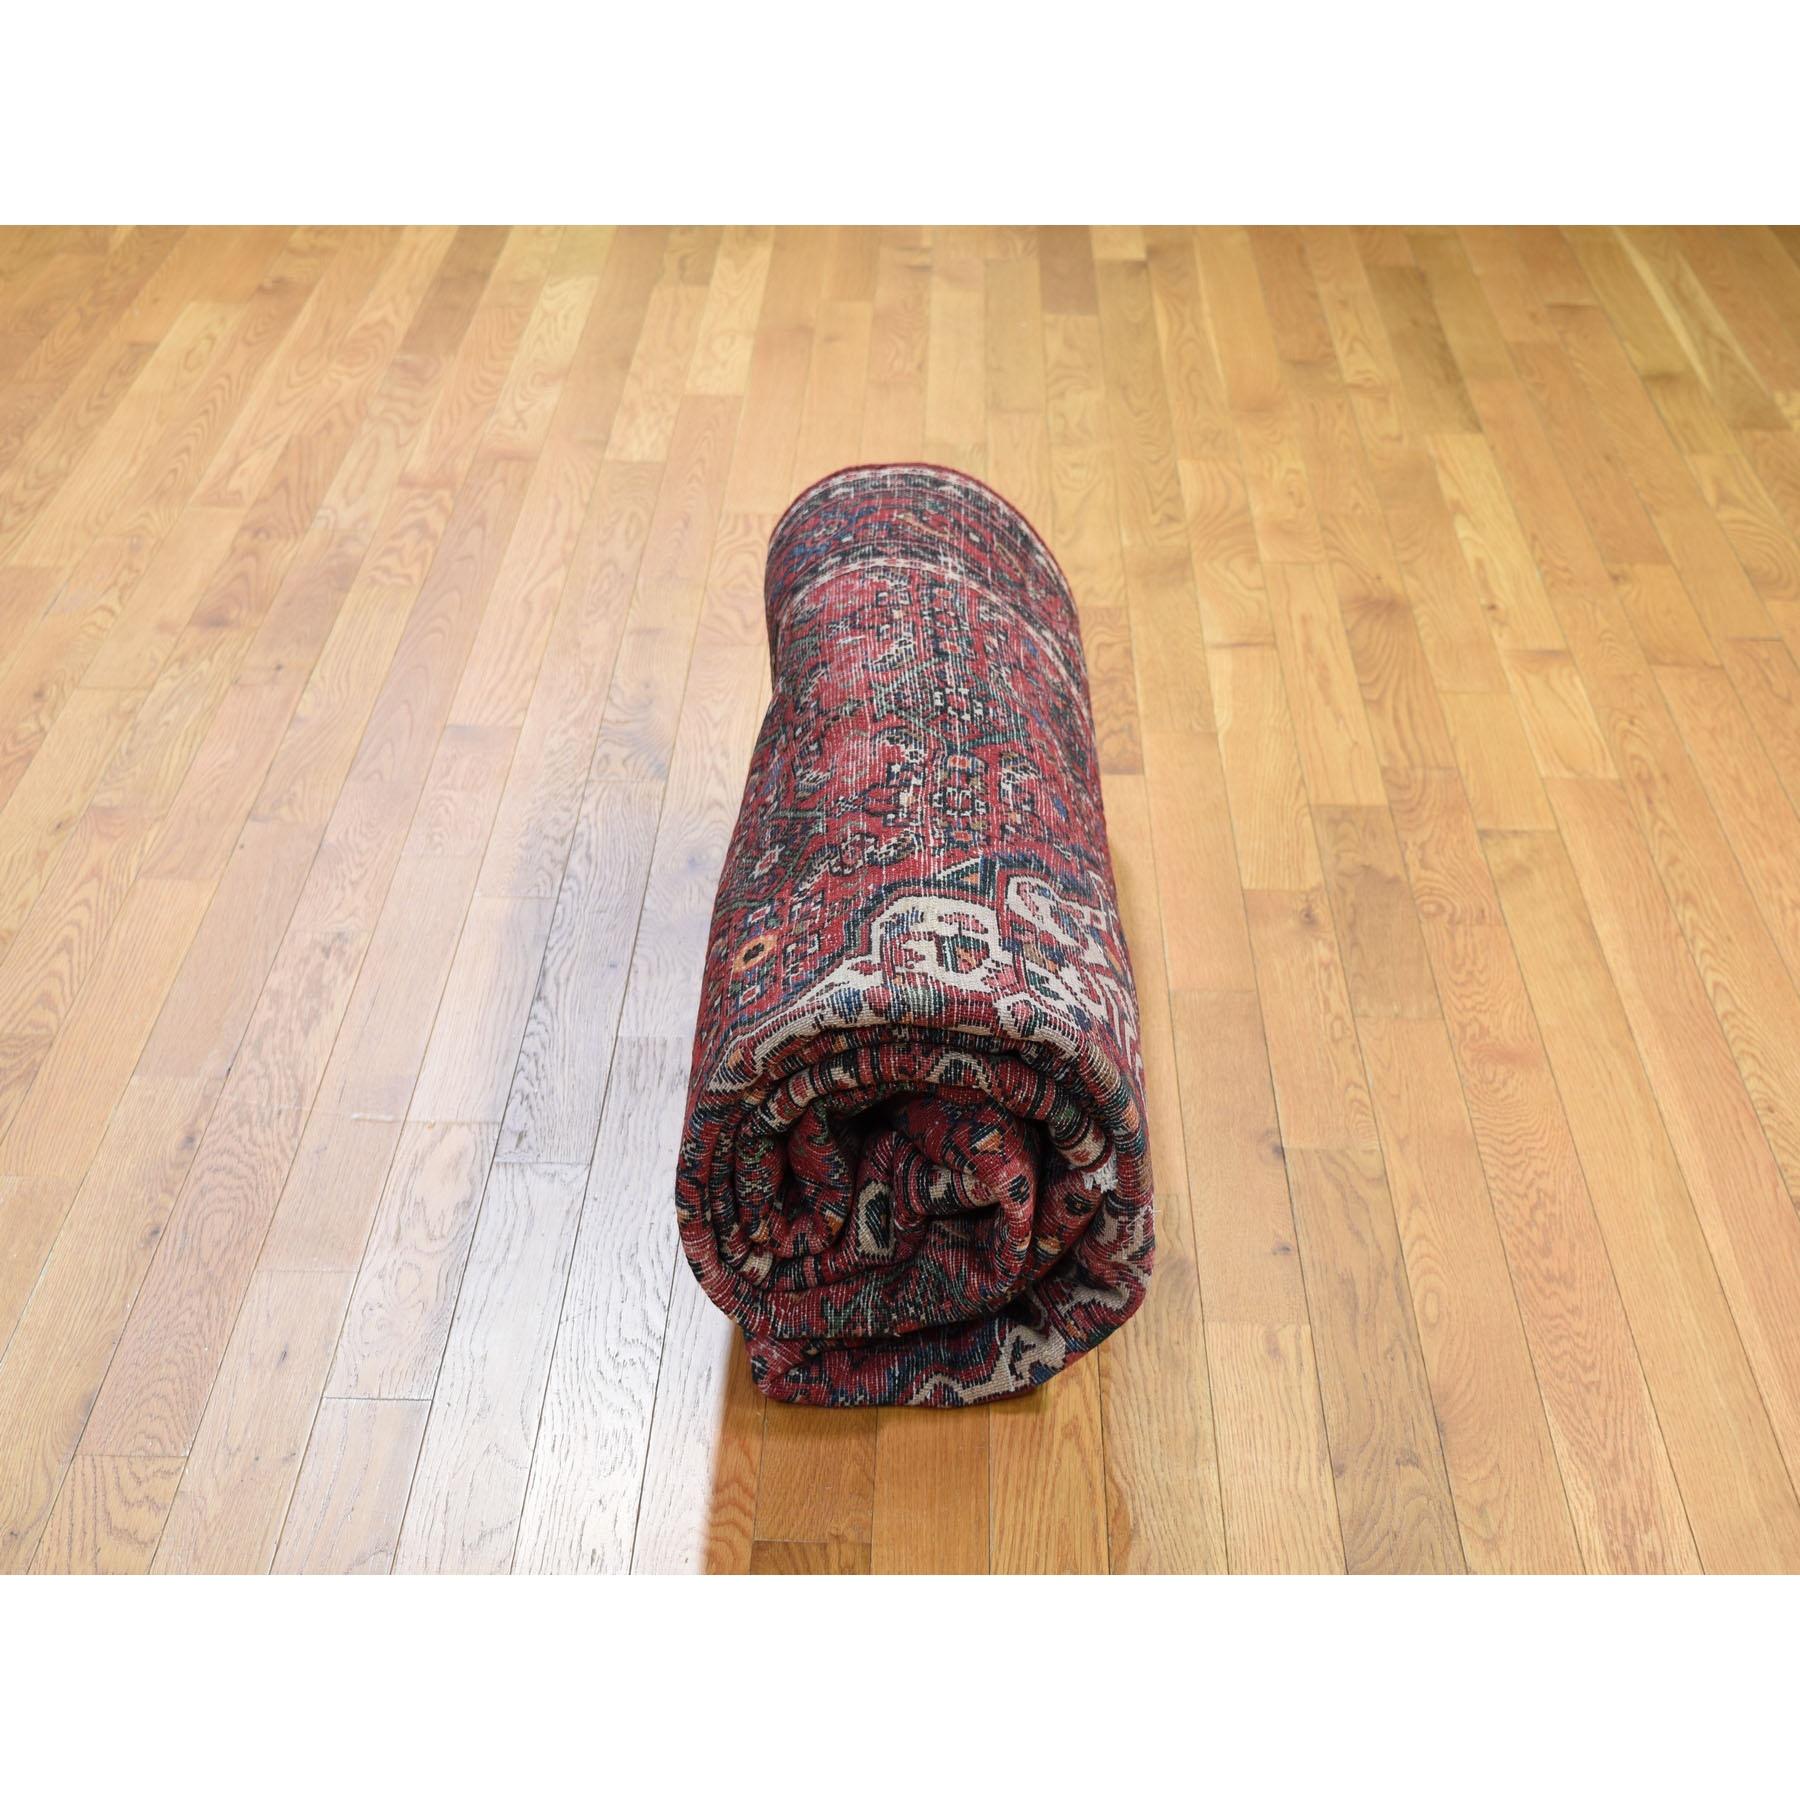 Red Persian Hamadan Pure Wool Hand Knotted Oriental Rug, 6'9